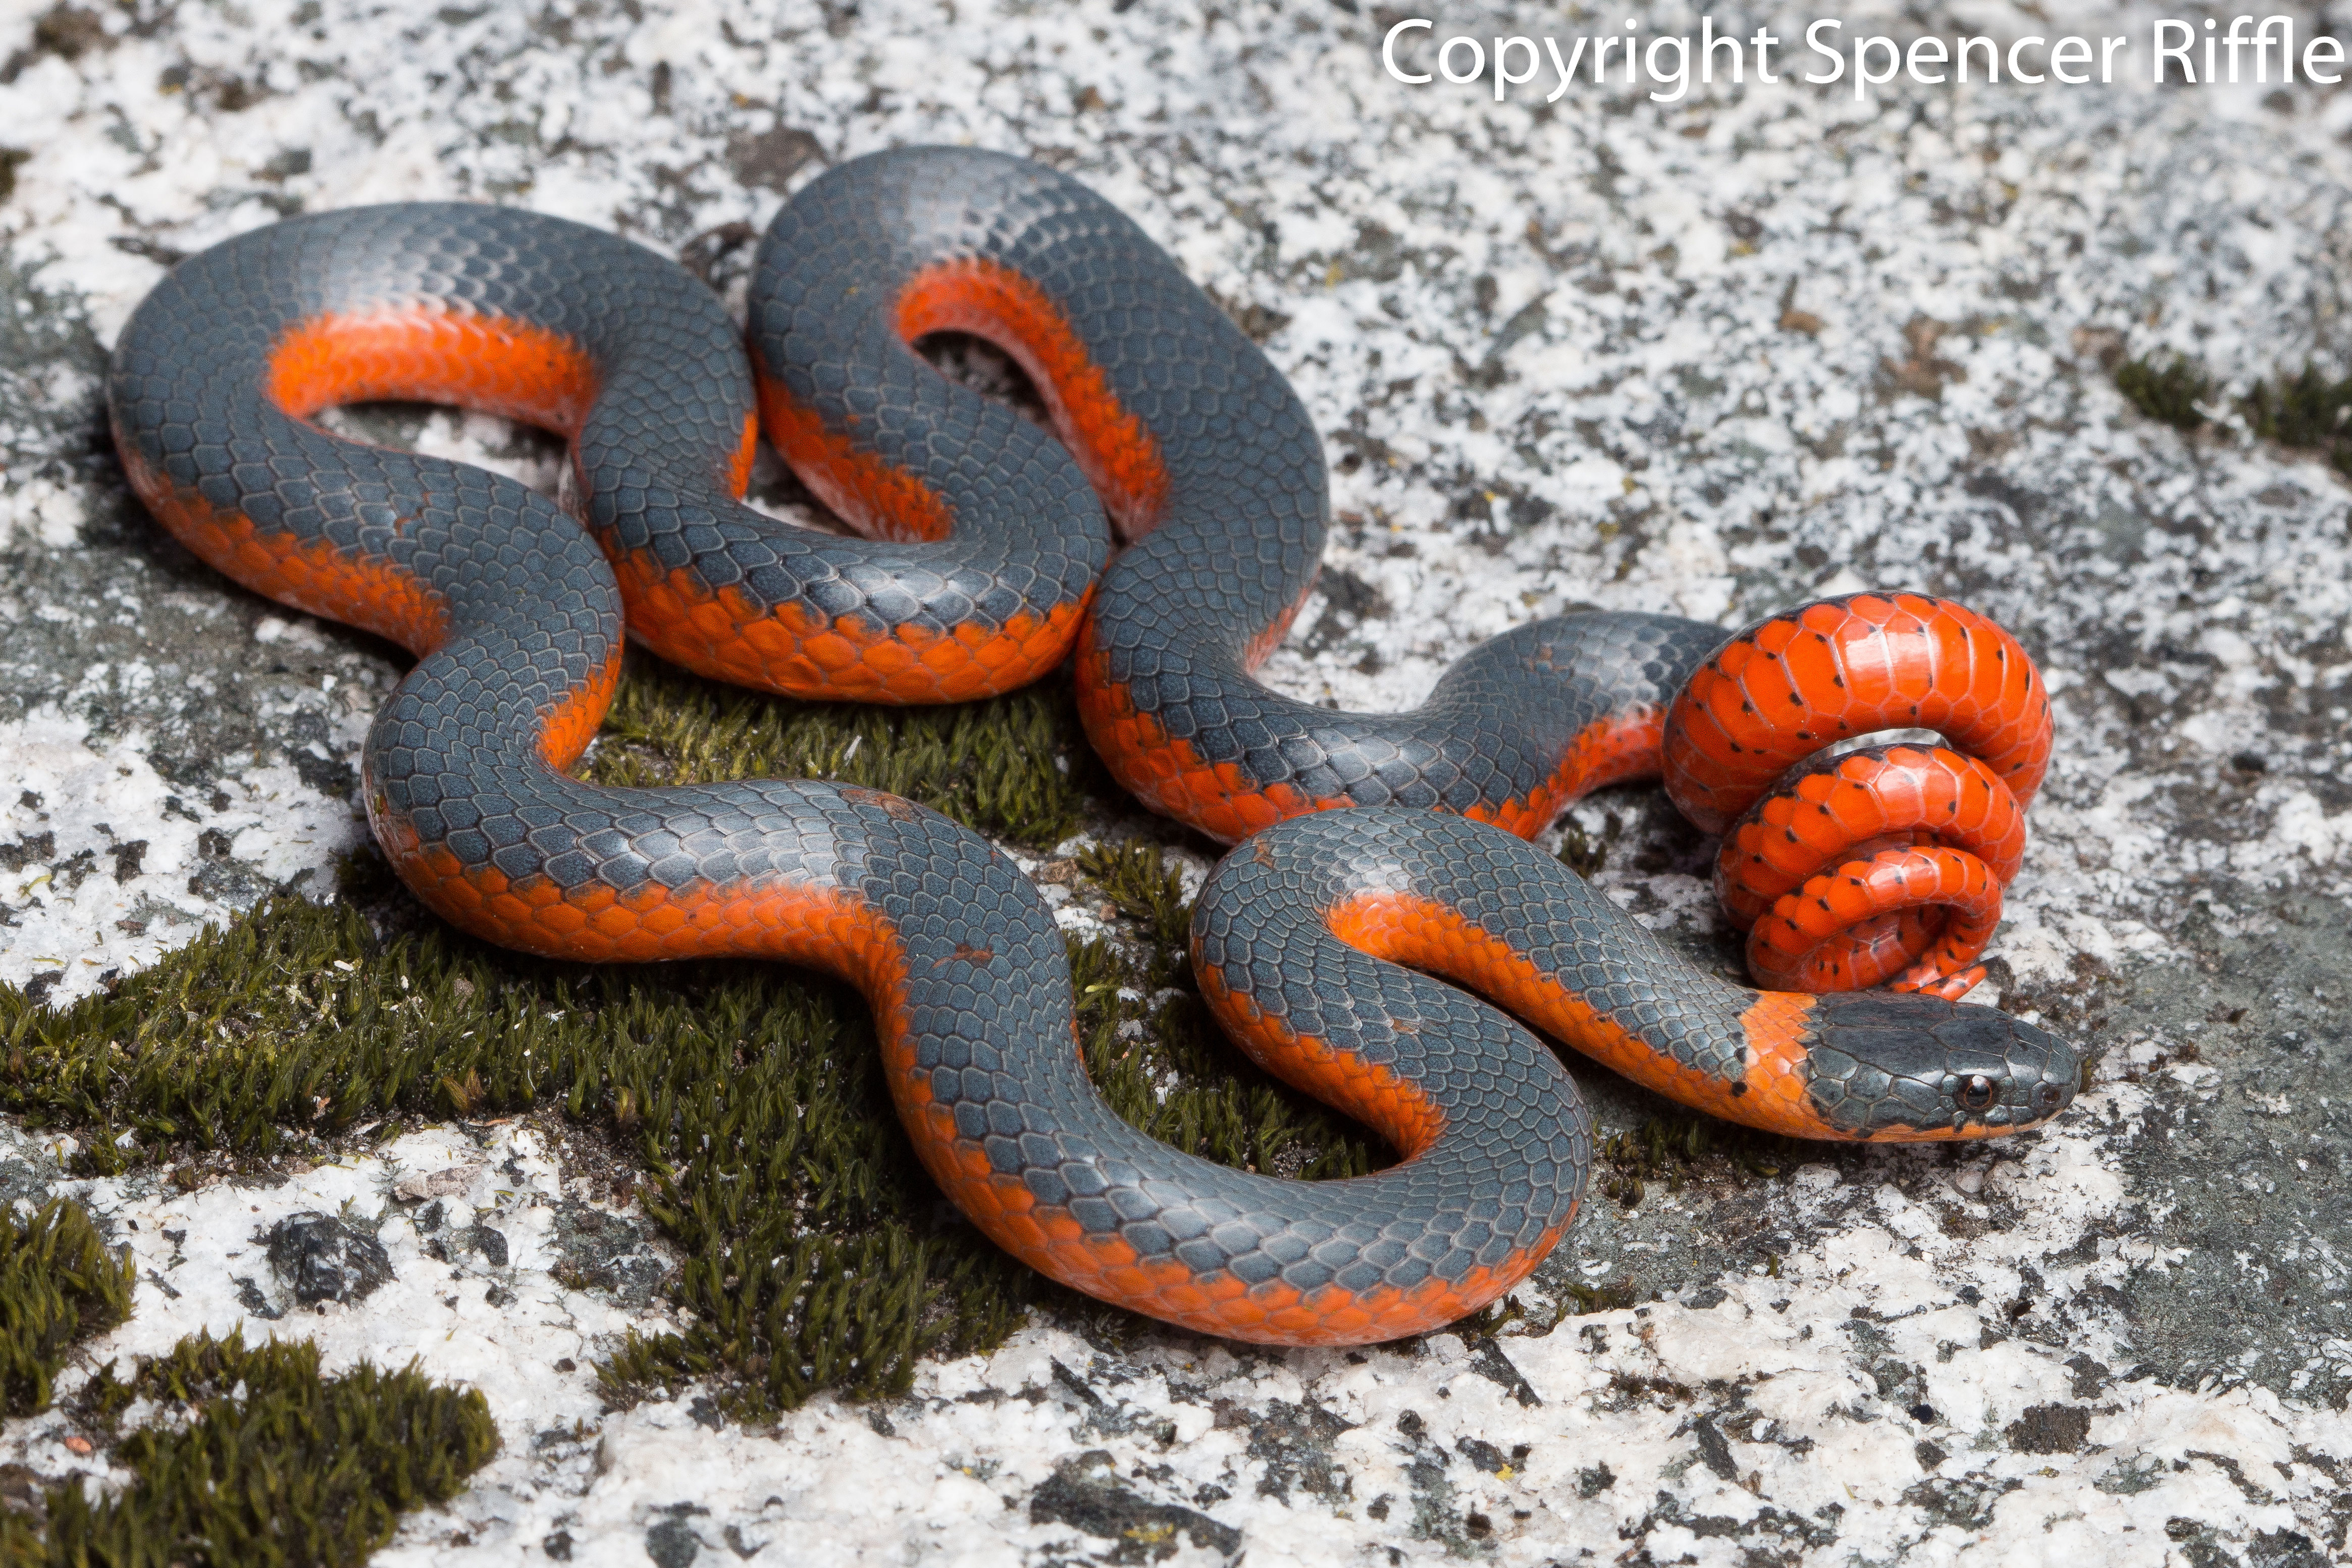 Coral-bellied Ring-necked Snake - Diadophis punctatus pulchellus